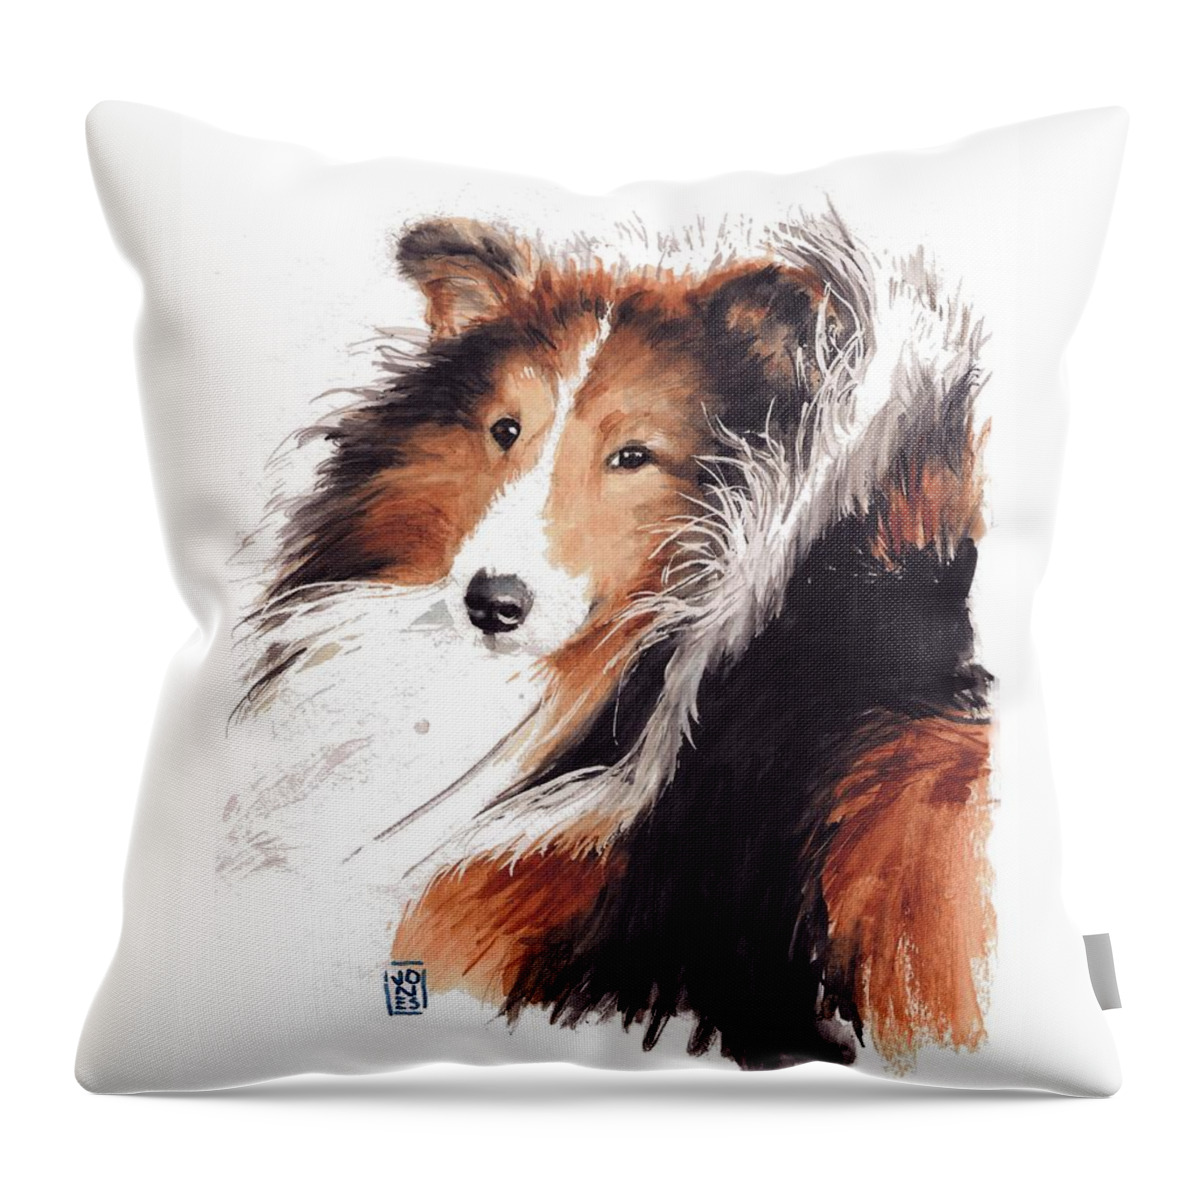 Sheltie Throw Pillow featuring the painting Sheltie by Debra Jones